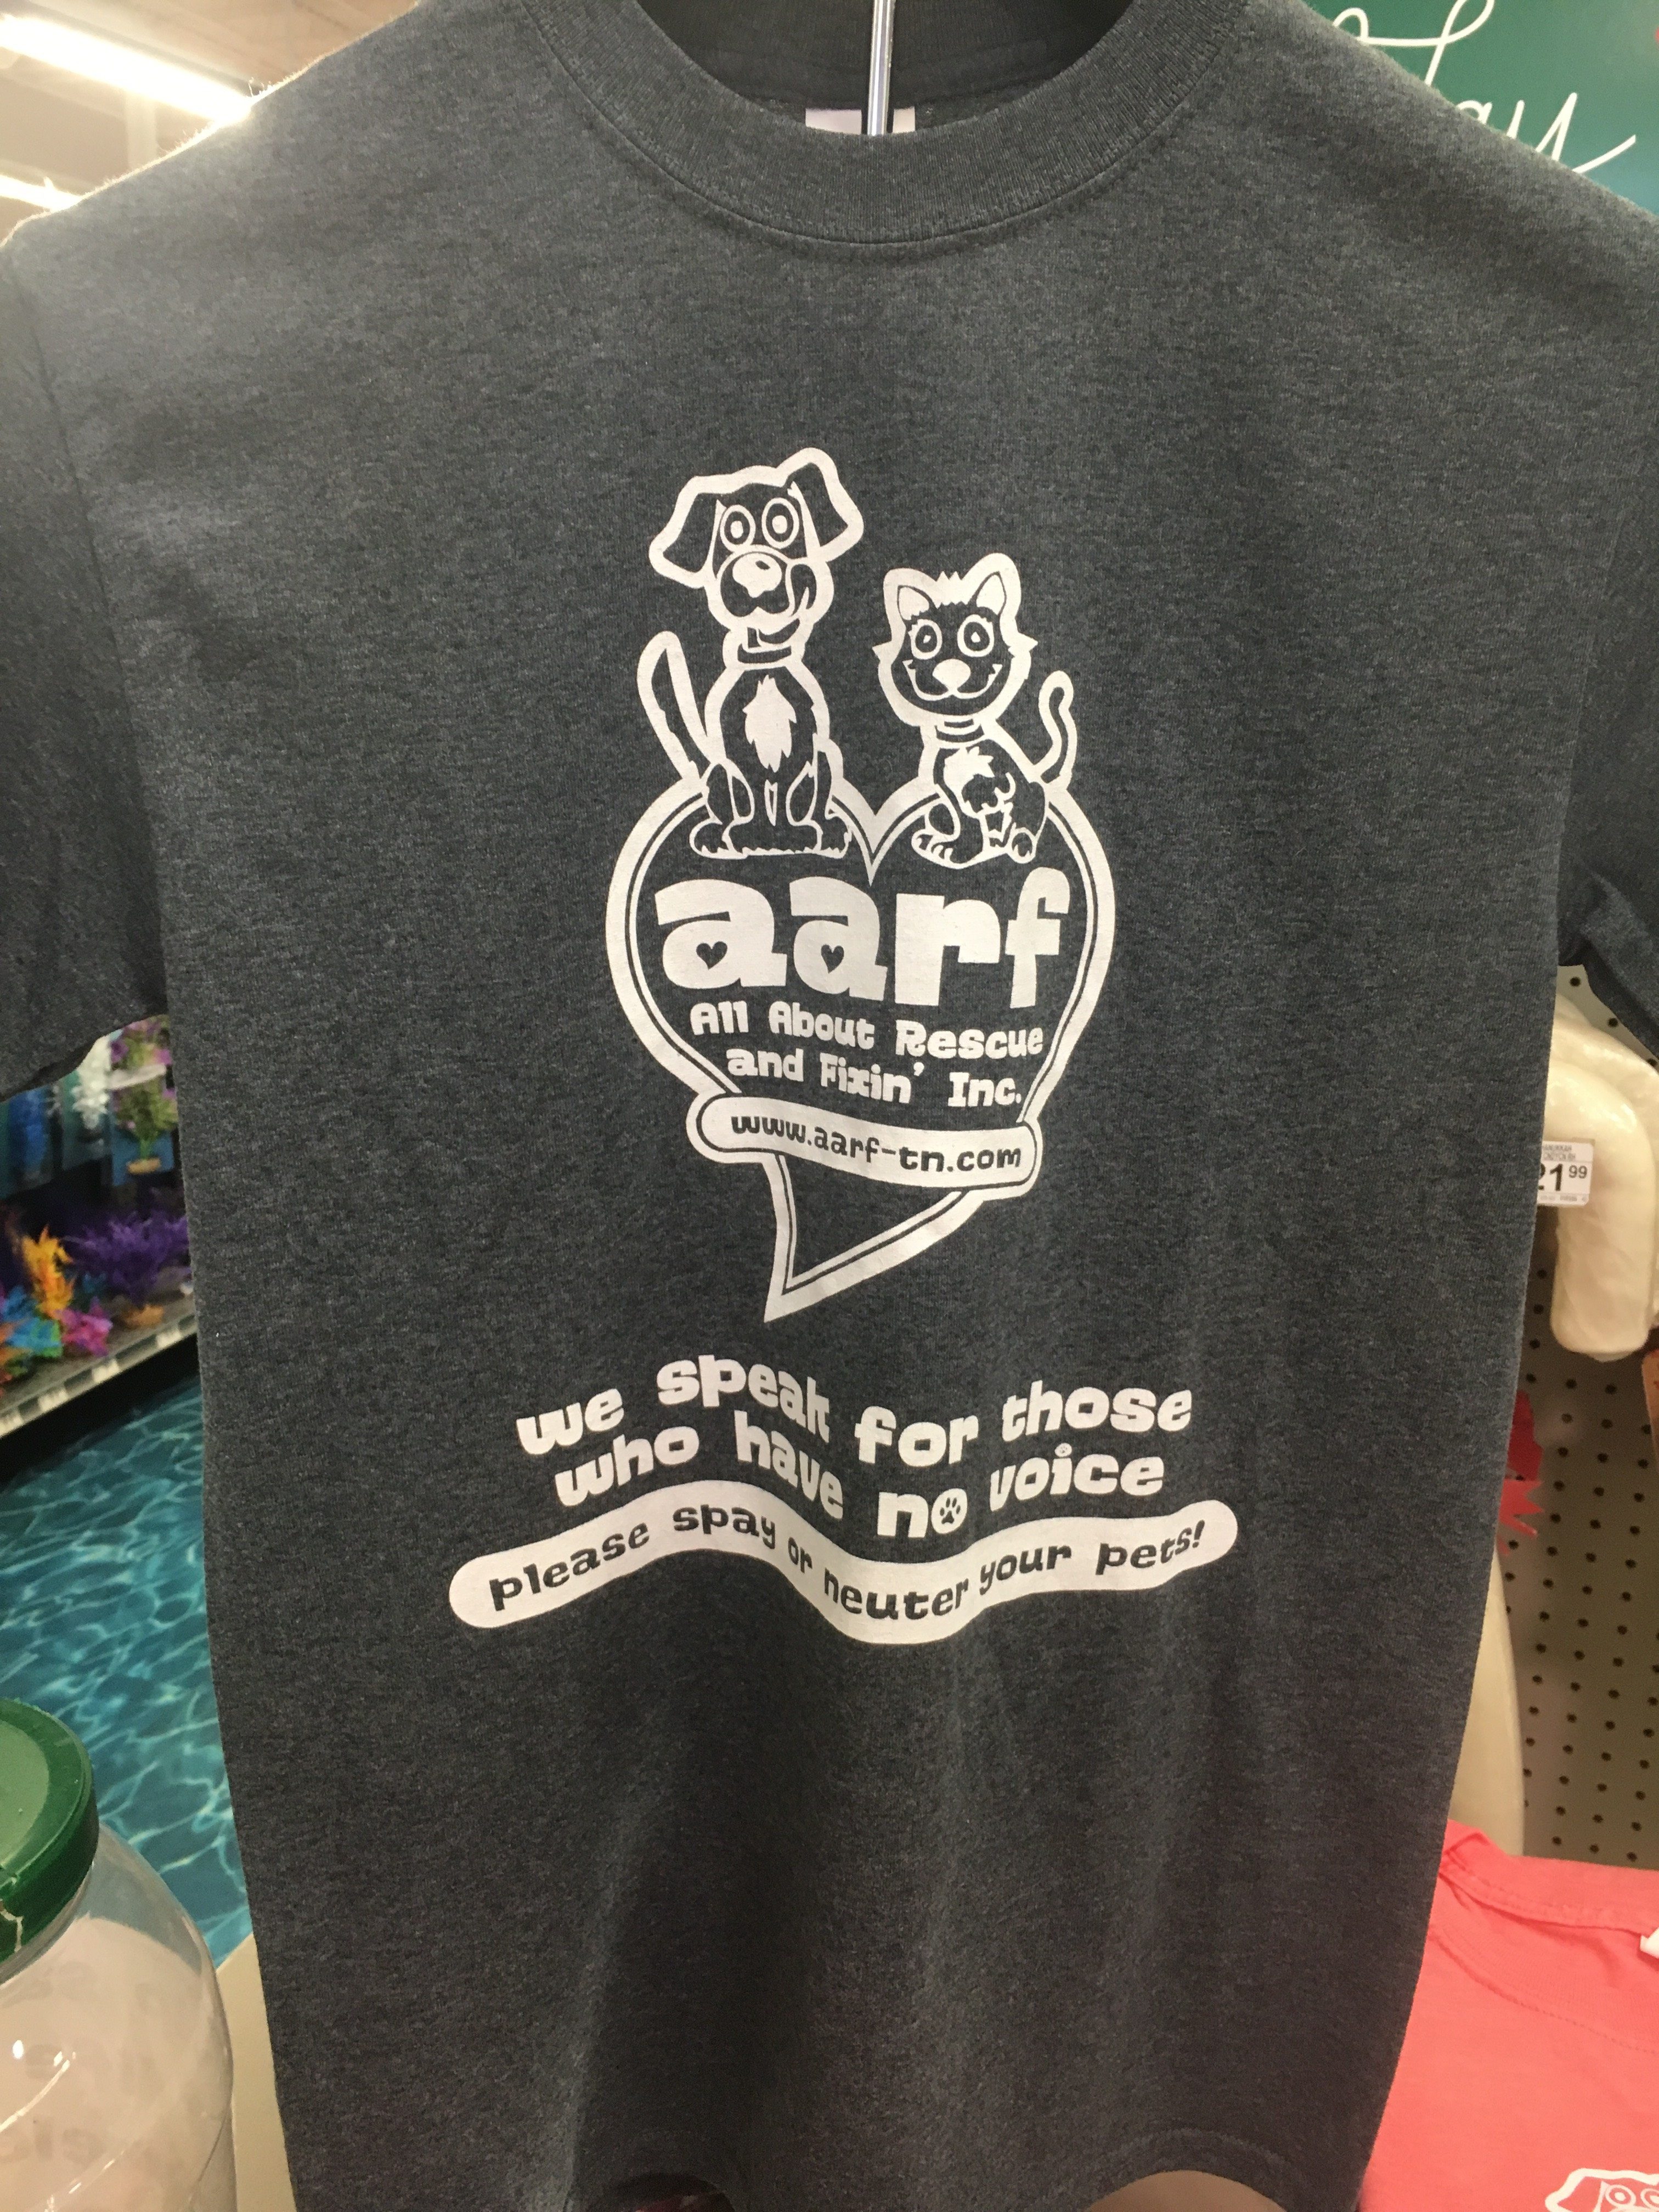 Get Your A.A.R.F. T-Shirt! – A.A.R.F. – All About Rescue and Fixin' Inc.